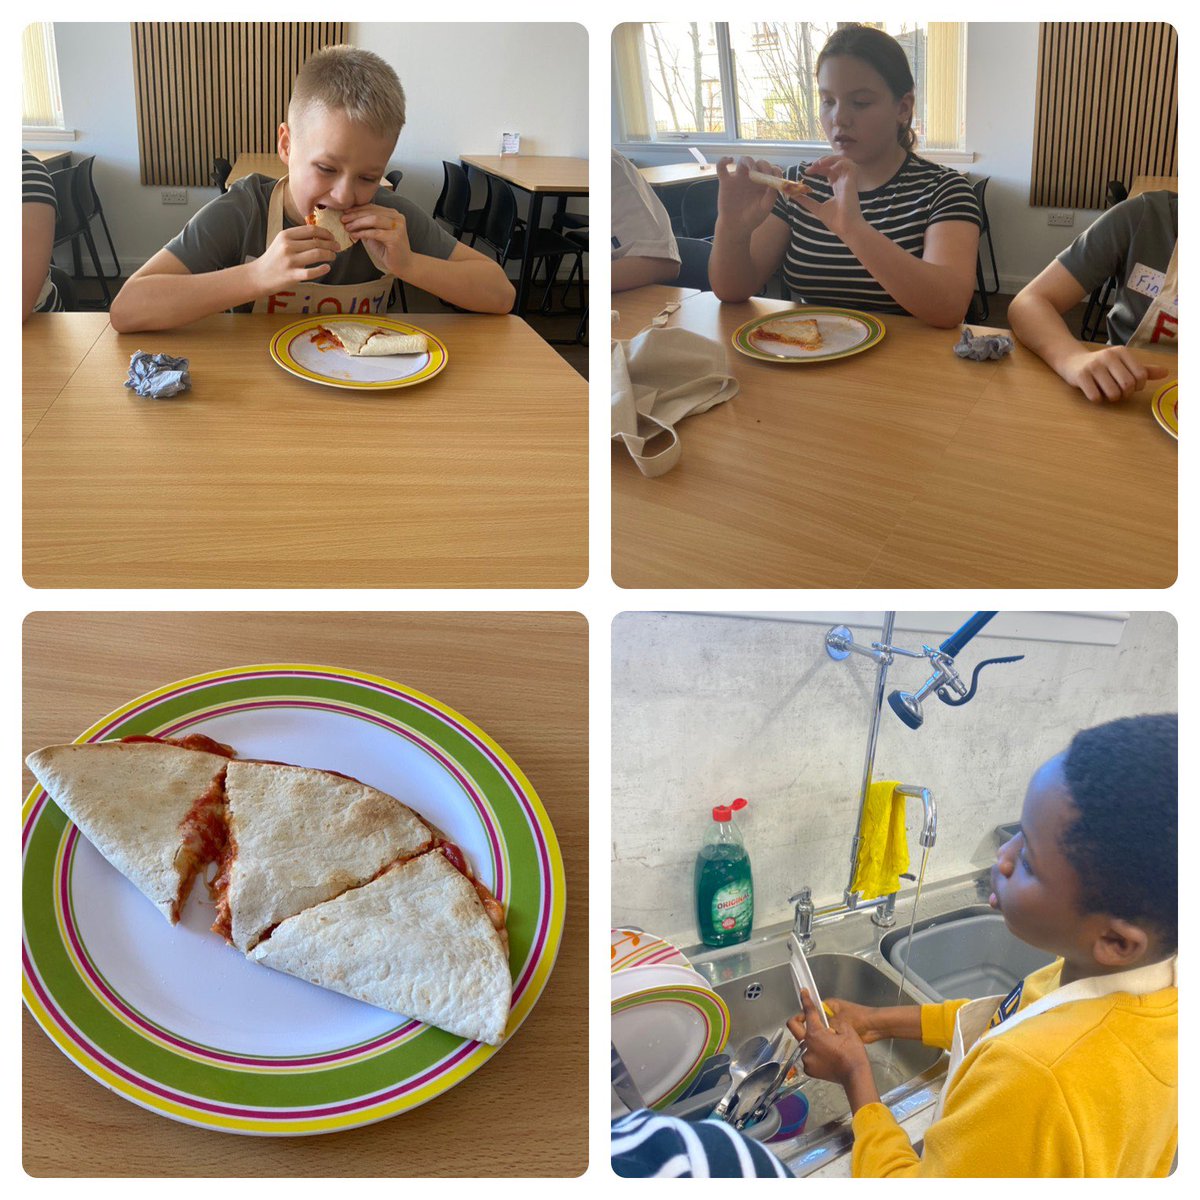 Some of P7 had lots of fun this afternoon with the Dietetic Students from @RobertGordonUni We were learning how to cook safely and enjoyed taste testing our pizza 🍕 @SeatonPSchool Next week the other half of P7 will enjoy their cooking session 🧑‍🍳 👩‍🍳